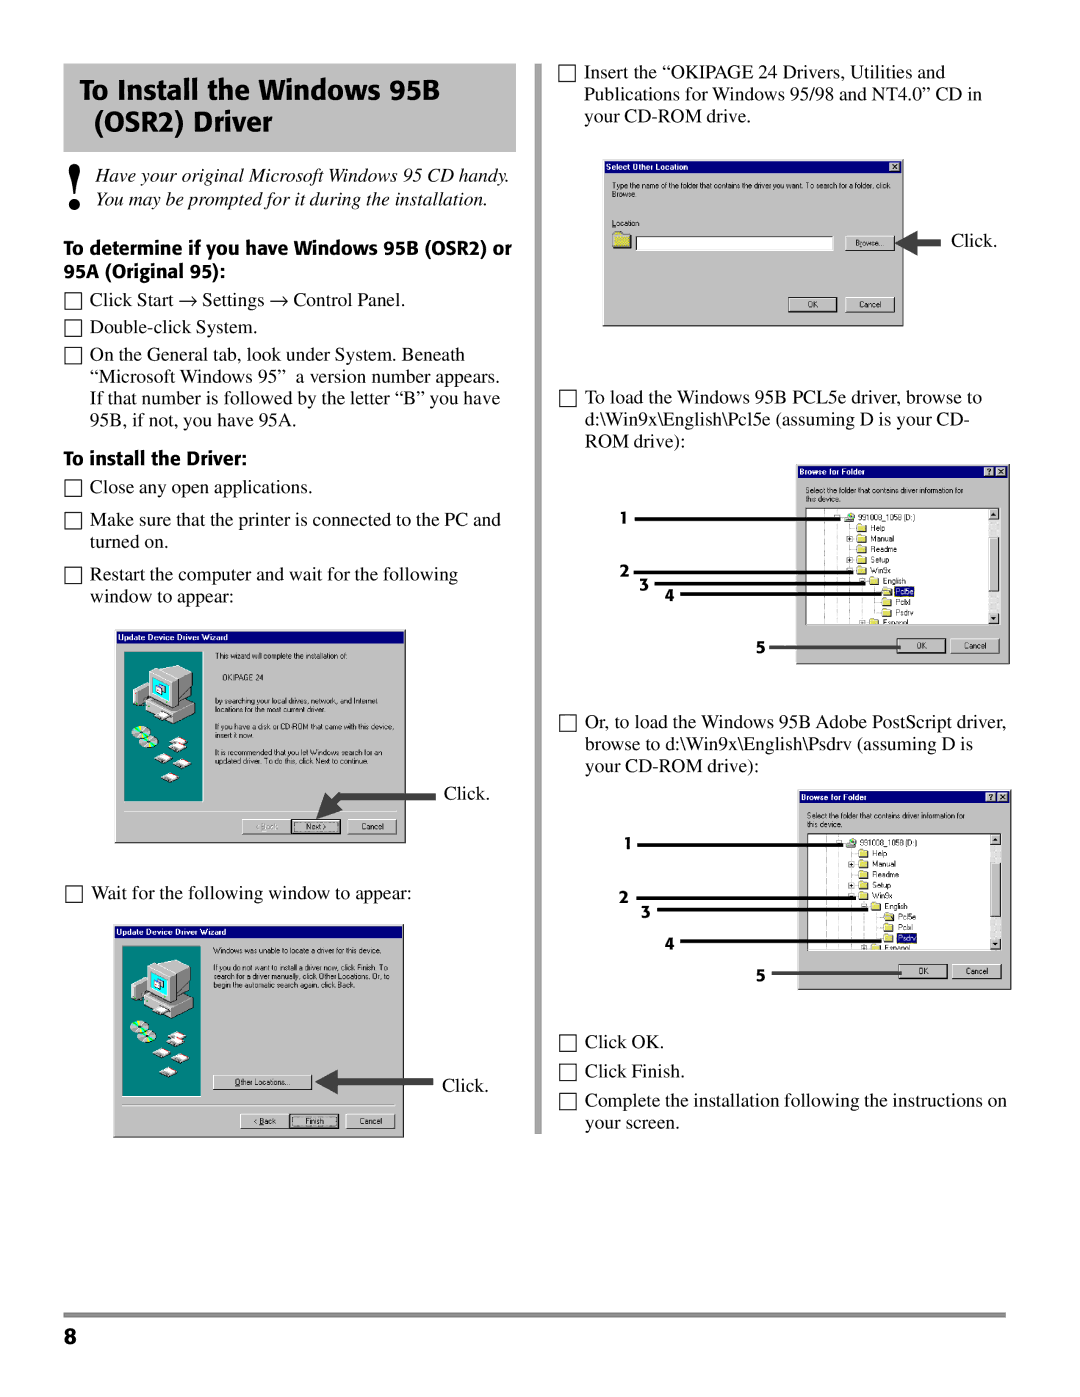 Oki PAGE 24 quick start To Install the Windows 95B OSR2 Driver, To determine if you have Windows 95B OSR2 or 95A Original 